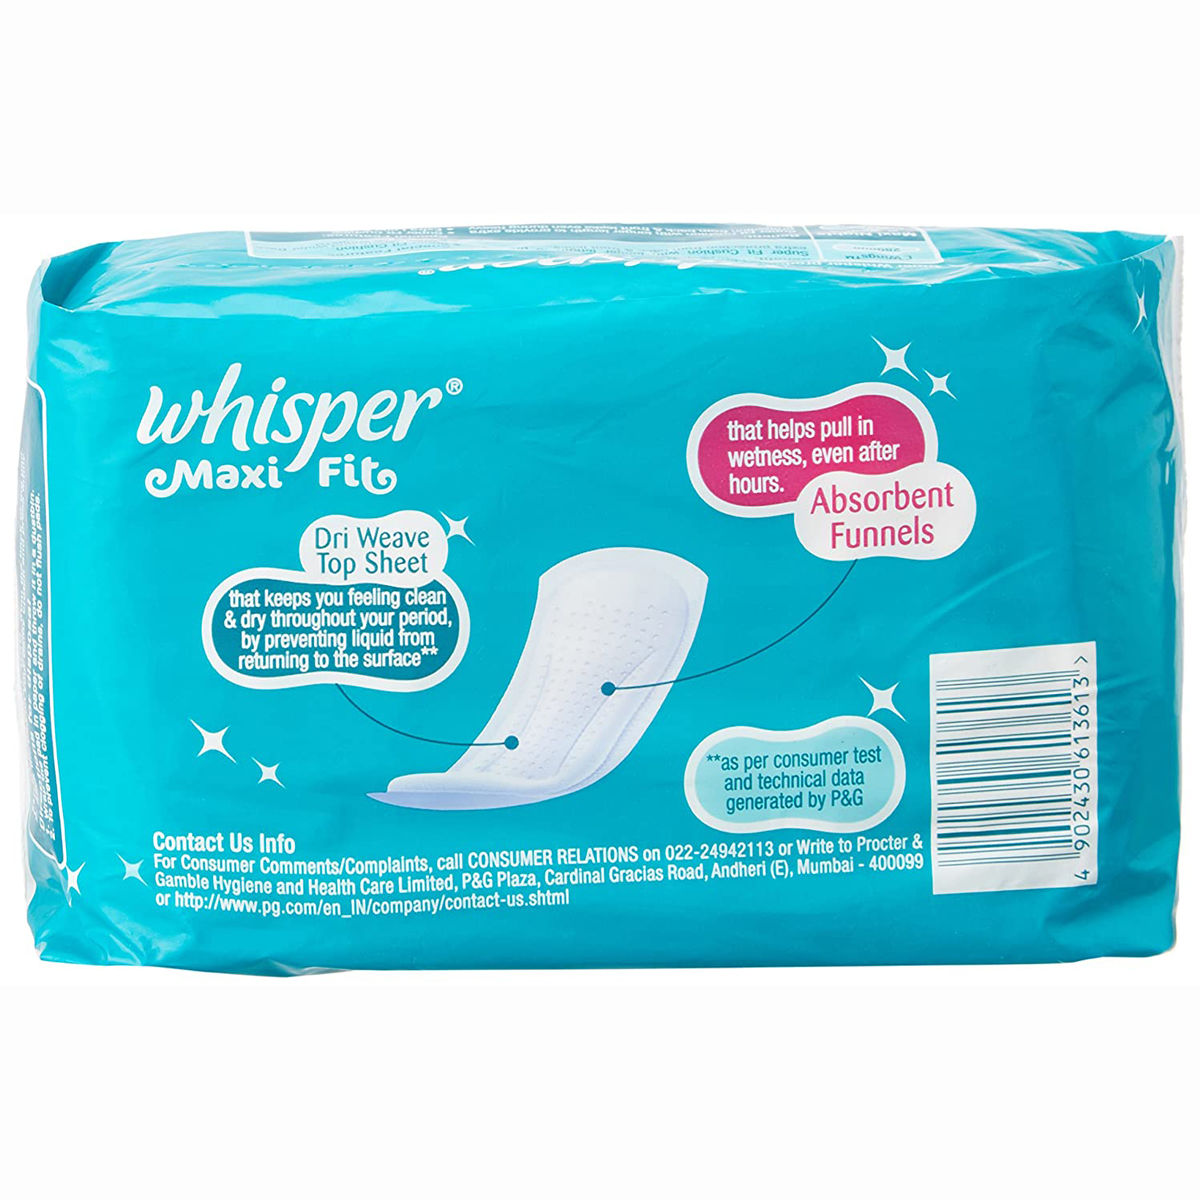 Whisper Maxi Fit Sanitary Pads Regular, 8 Count, Pack of 1 